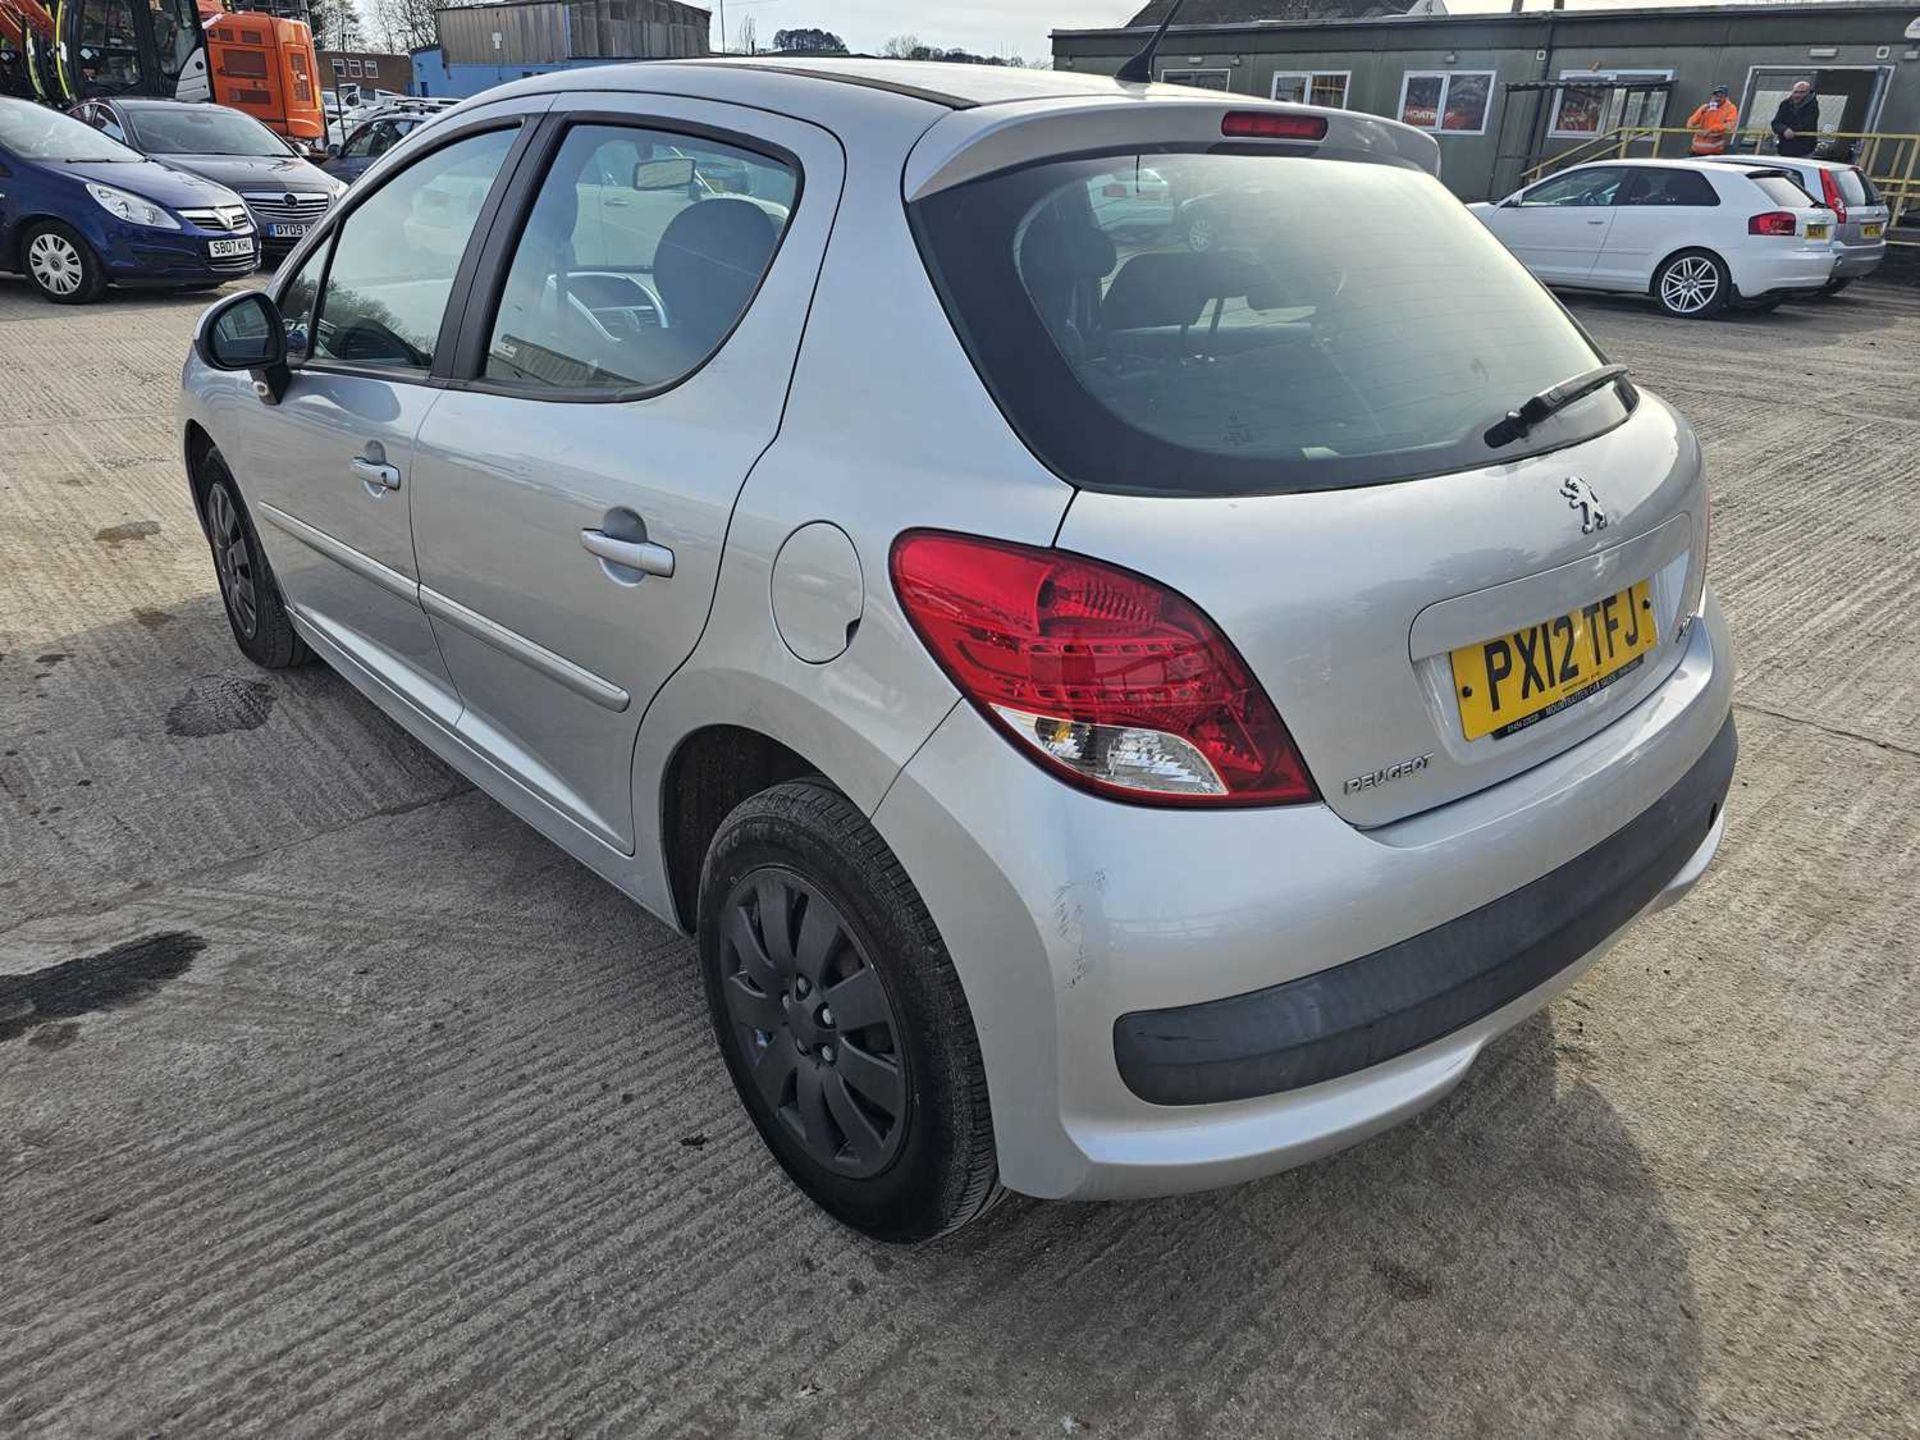 2012 Peugeot 207, 5 Speed, A/C (Reg. Docs. Available, Tested 06/24) - Image 4 of 28